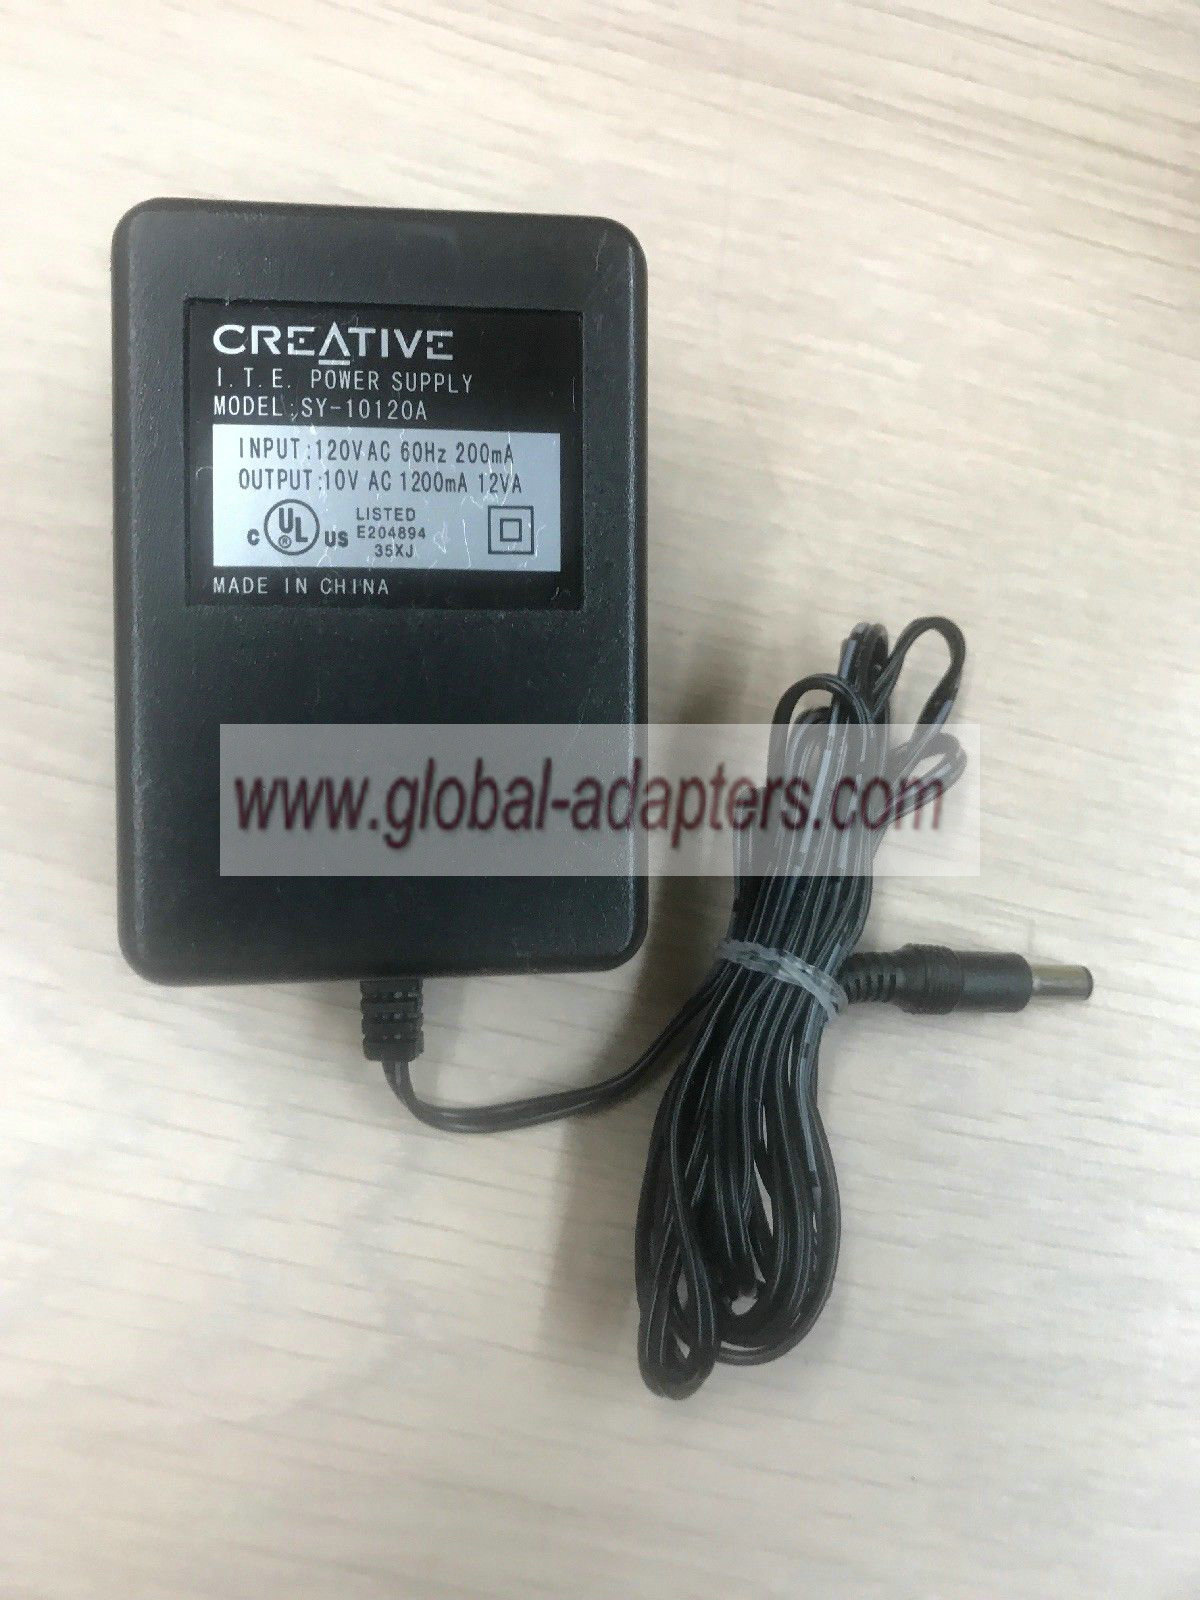 New AC/AC Adapter for Creative SY-10120A 10VAC 1200mA I.T.E Power Supply Adapter Charger - Click Image to Close